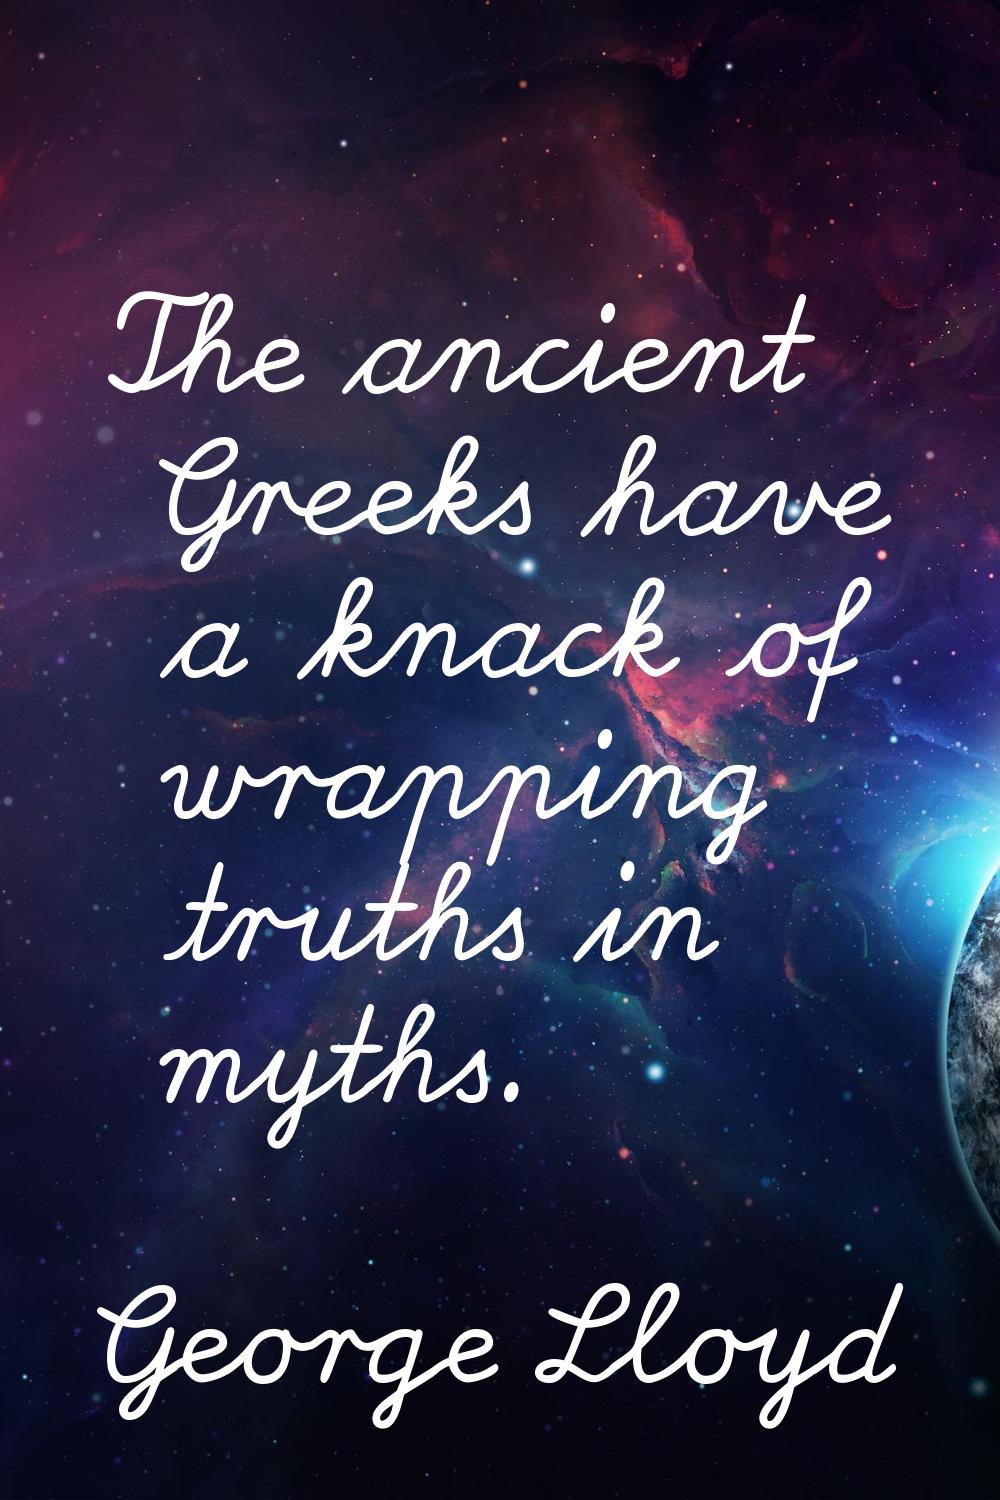 The ancient Greeks have a knack of wrapping truths in myths.